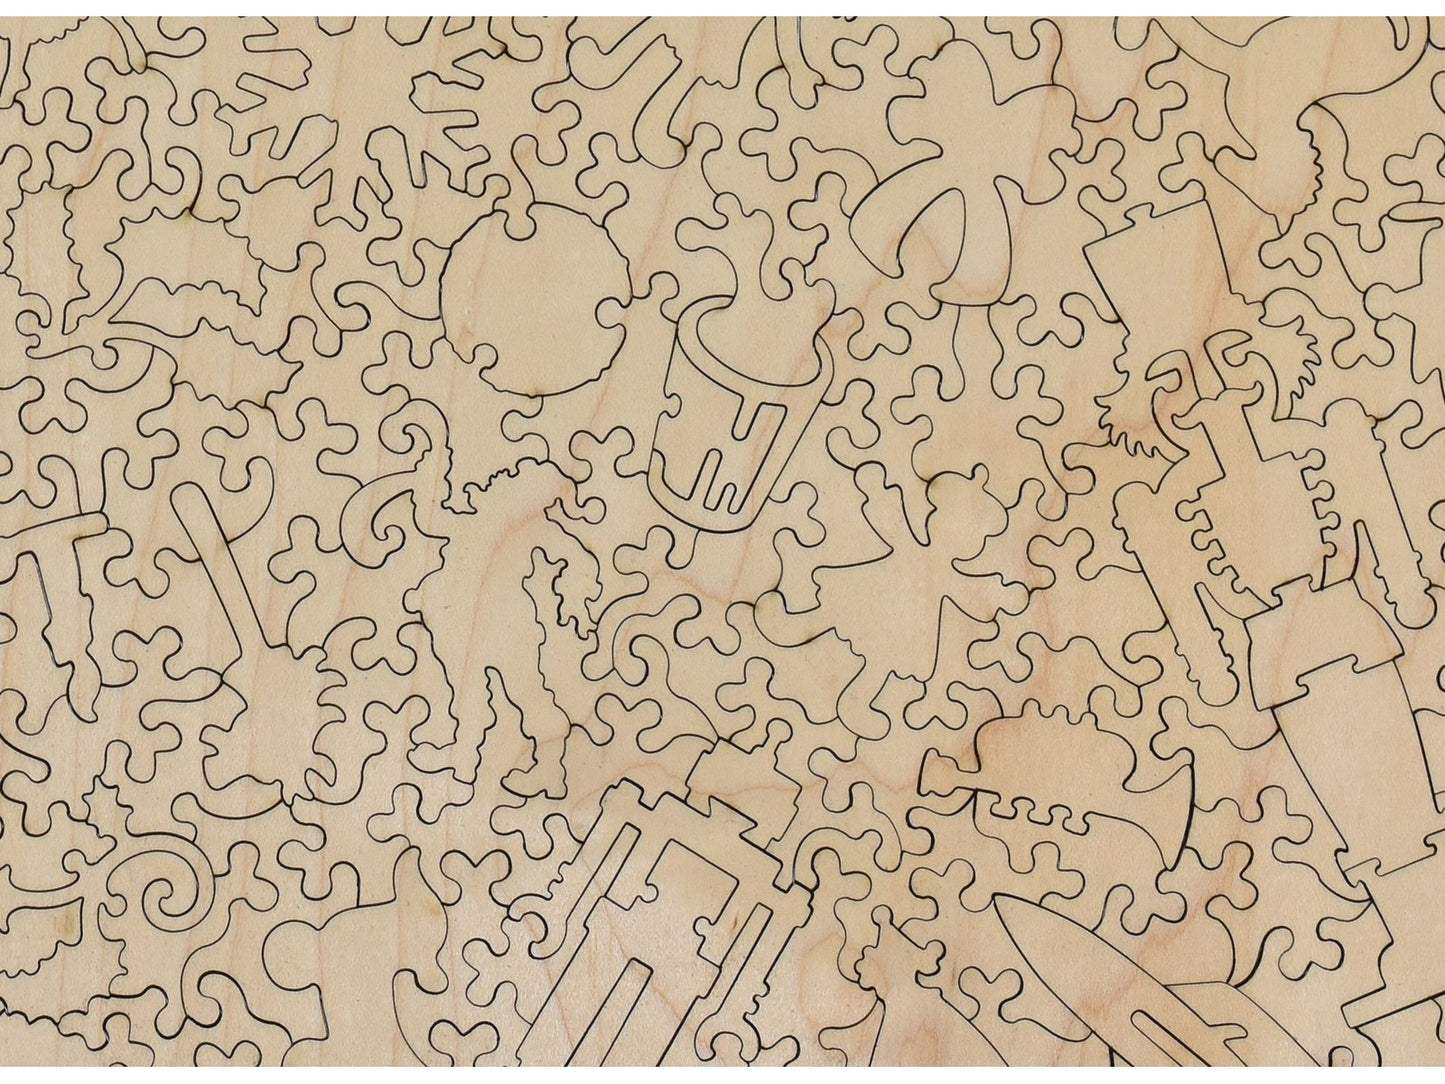 A closeup of the back of the puzzle, Toys a Plenty.